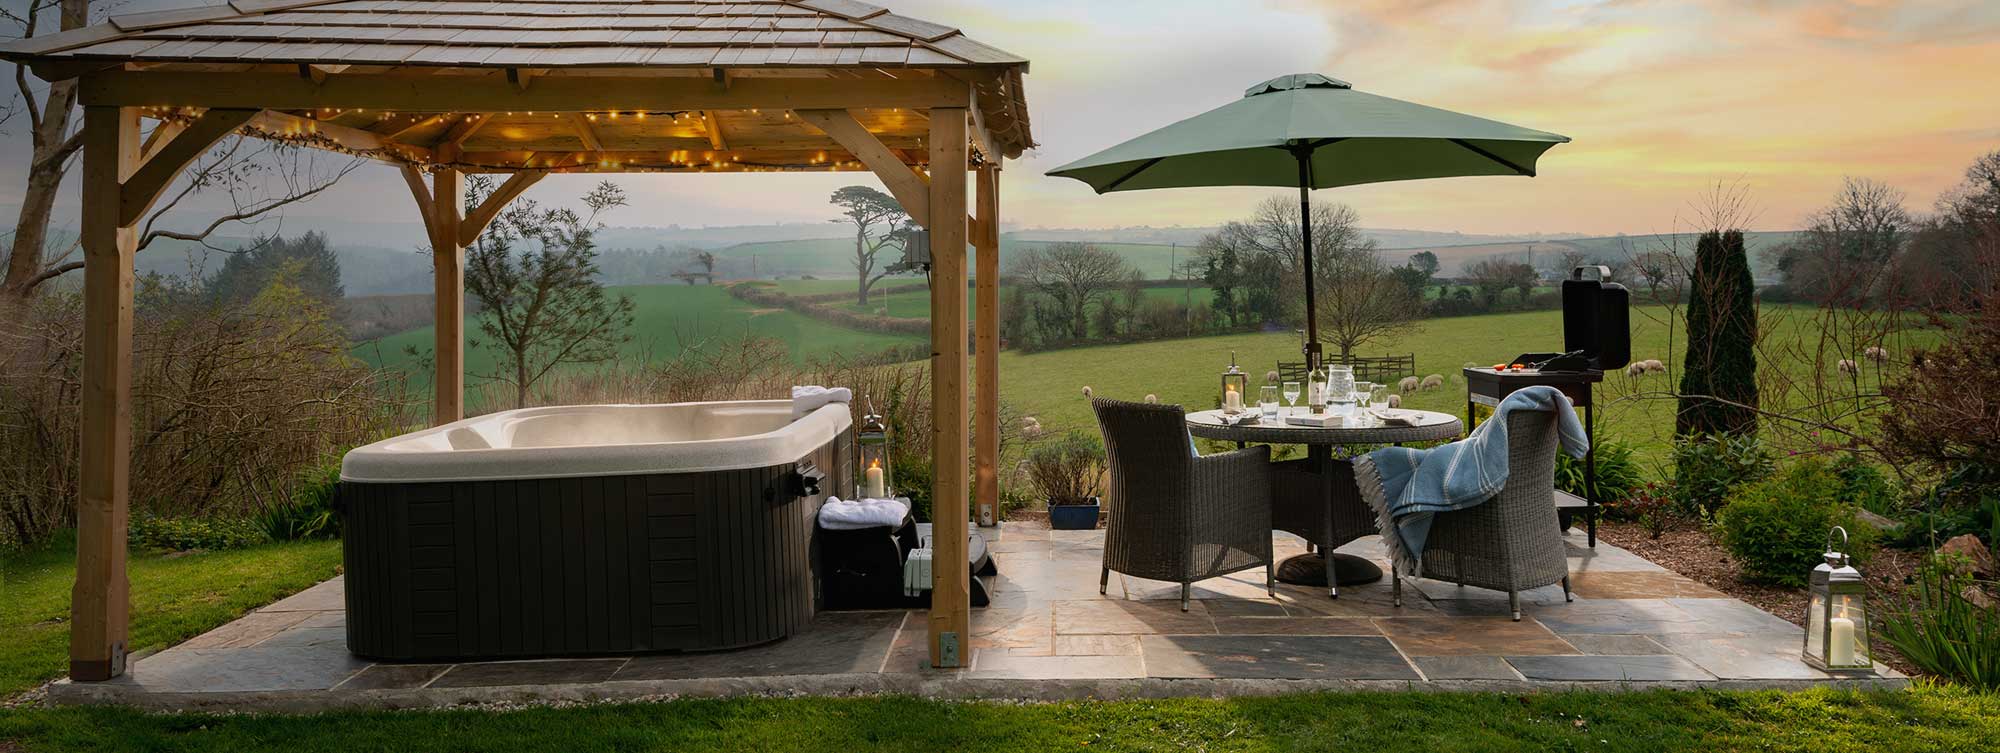 Luxury hot tub cottage with far-reaching views over rolling Cornish countryside